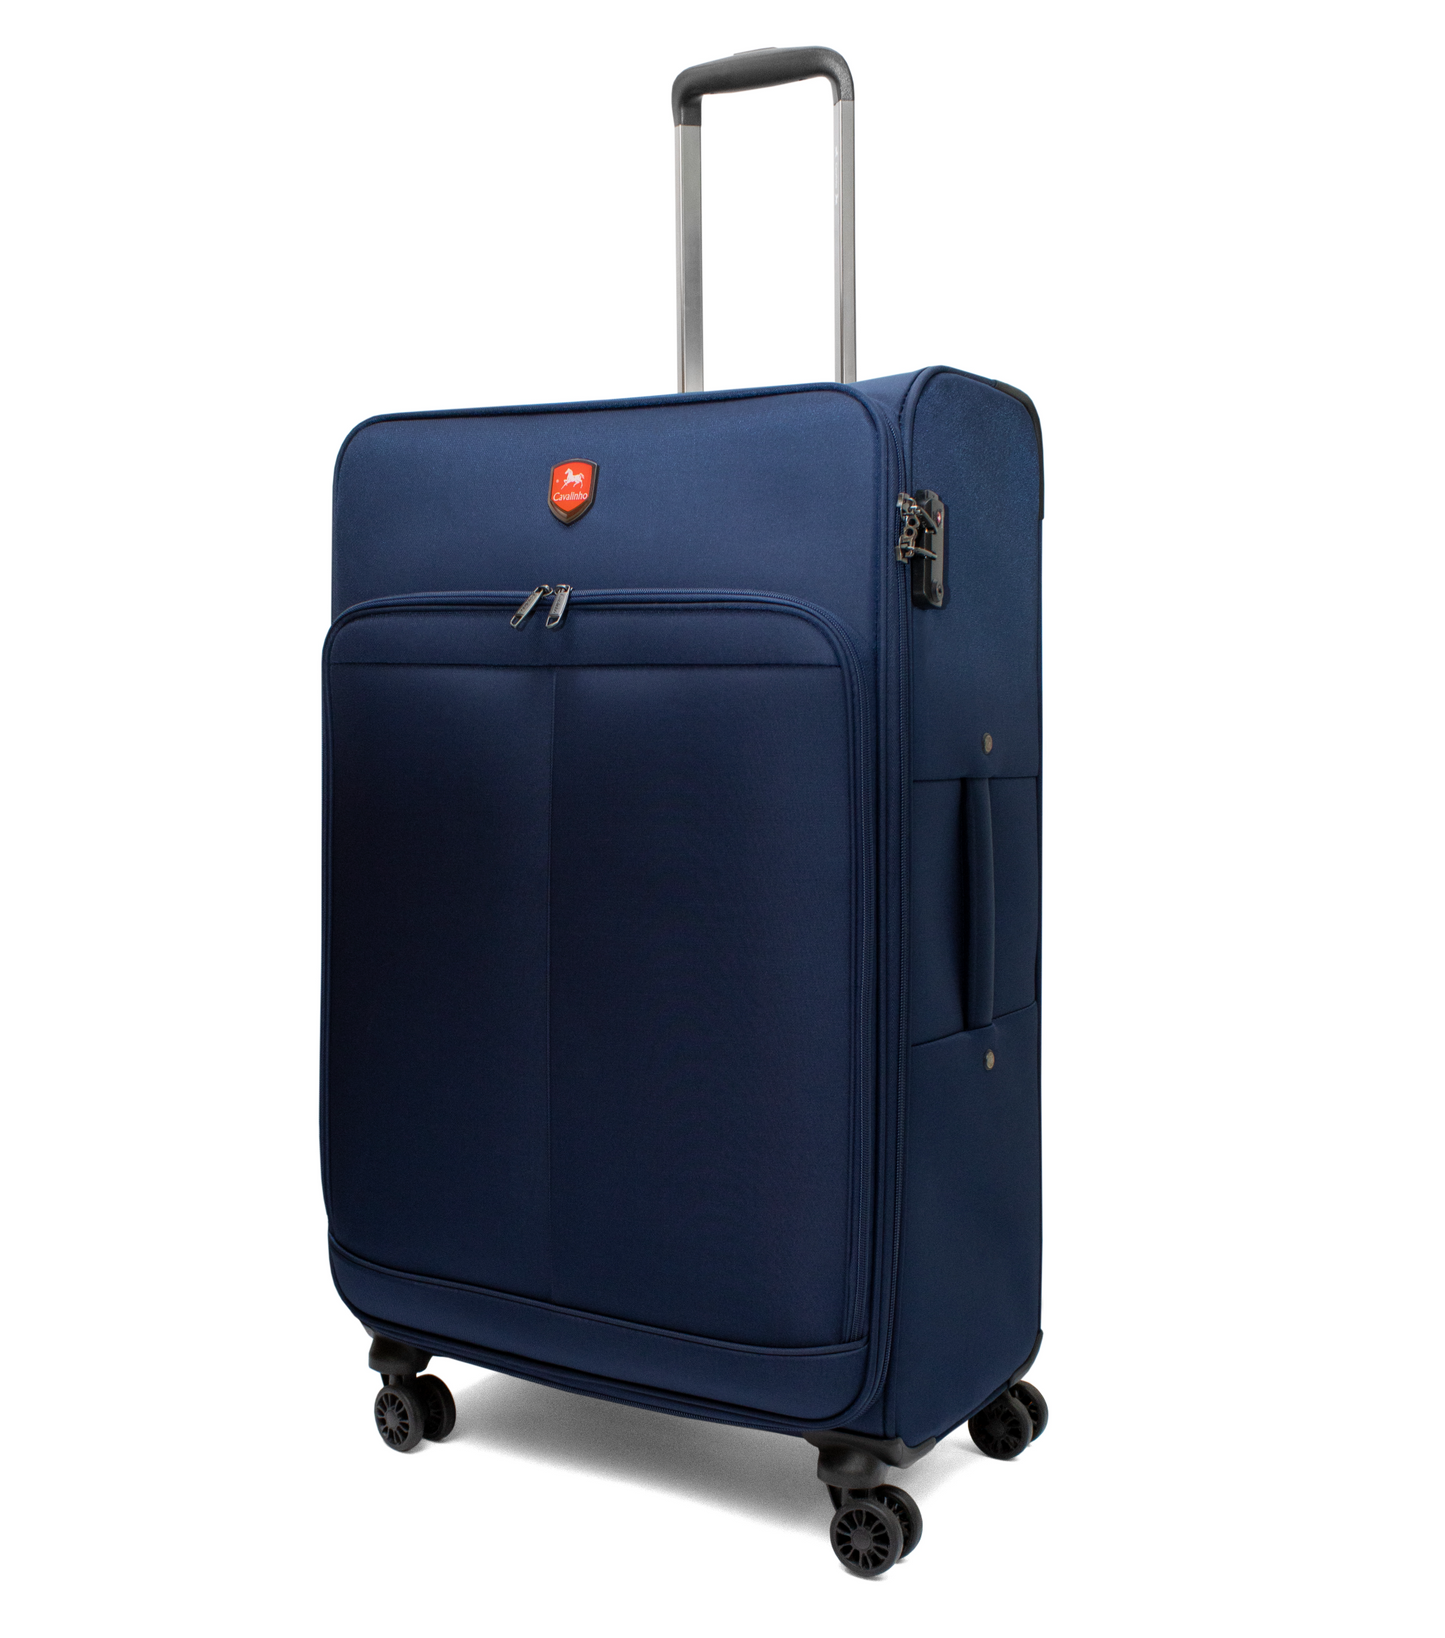 Cavalinho Check-in Softside Luggage (24" or 28") - 28 inch SteelBlue - 68020003.03.28_2